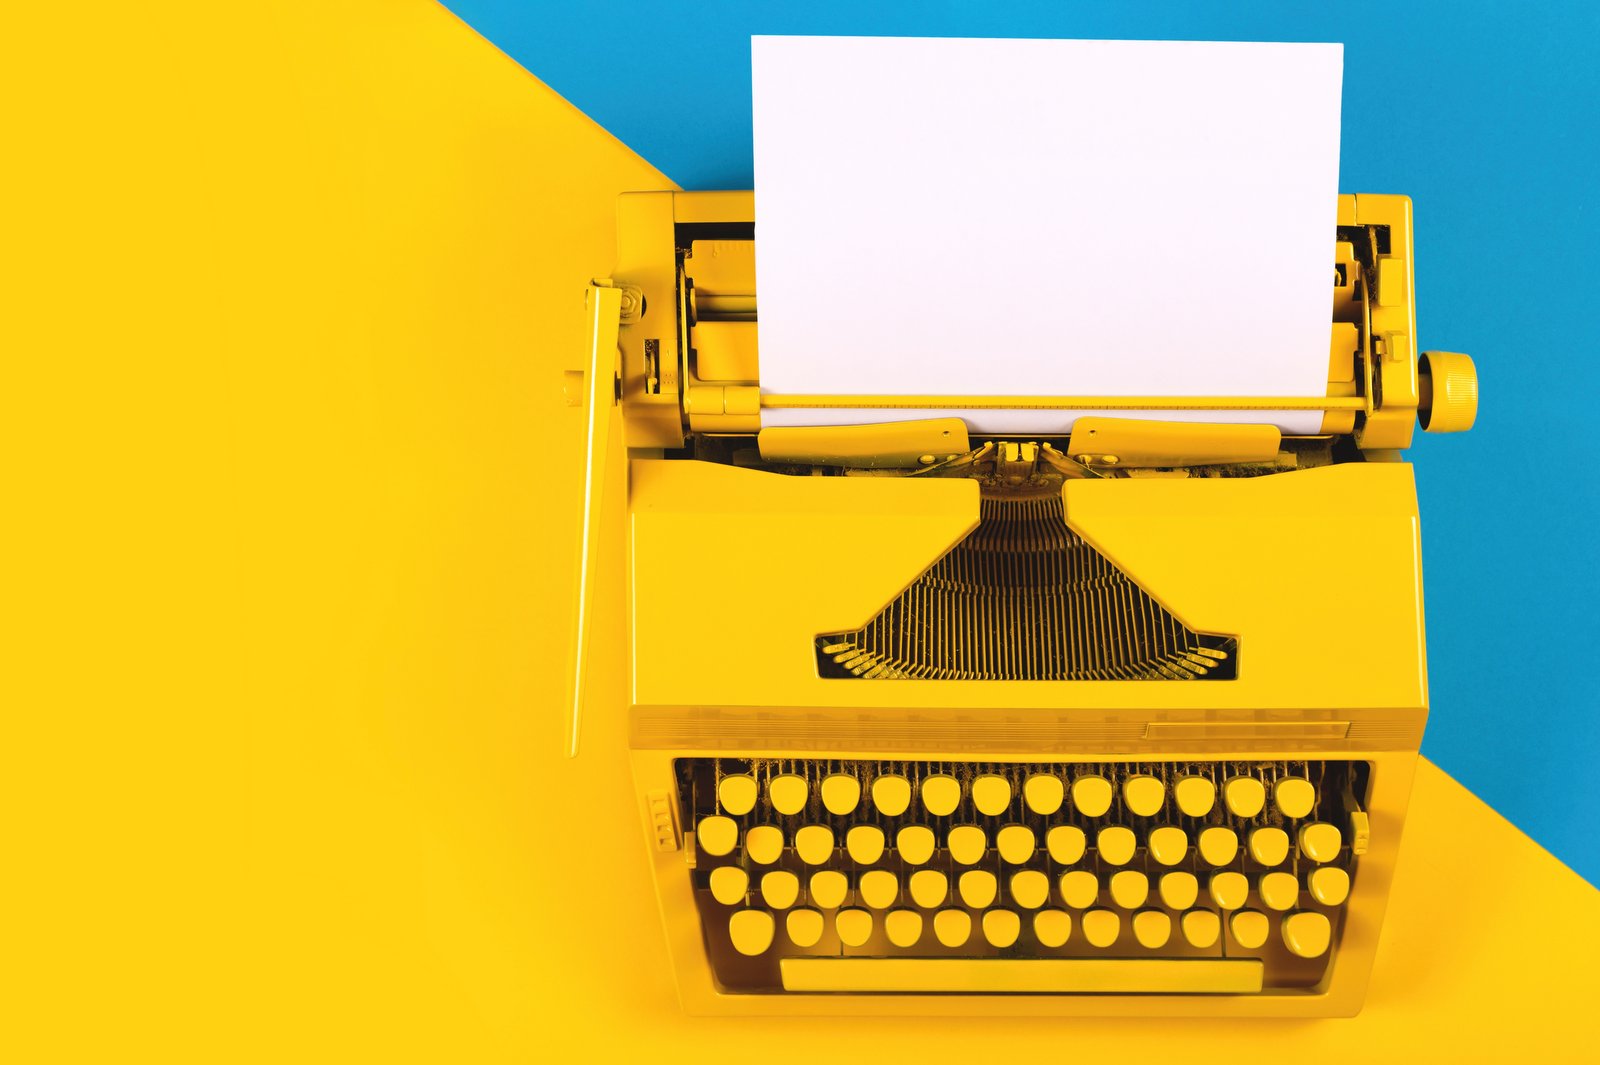 Vintage typewriter on blue and yellow background - For writers